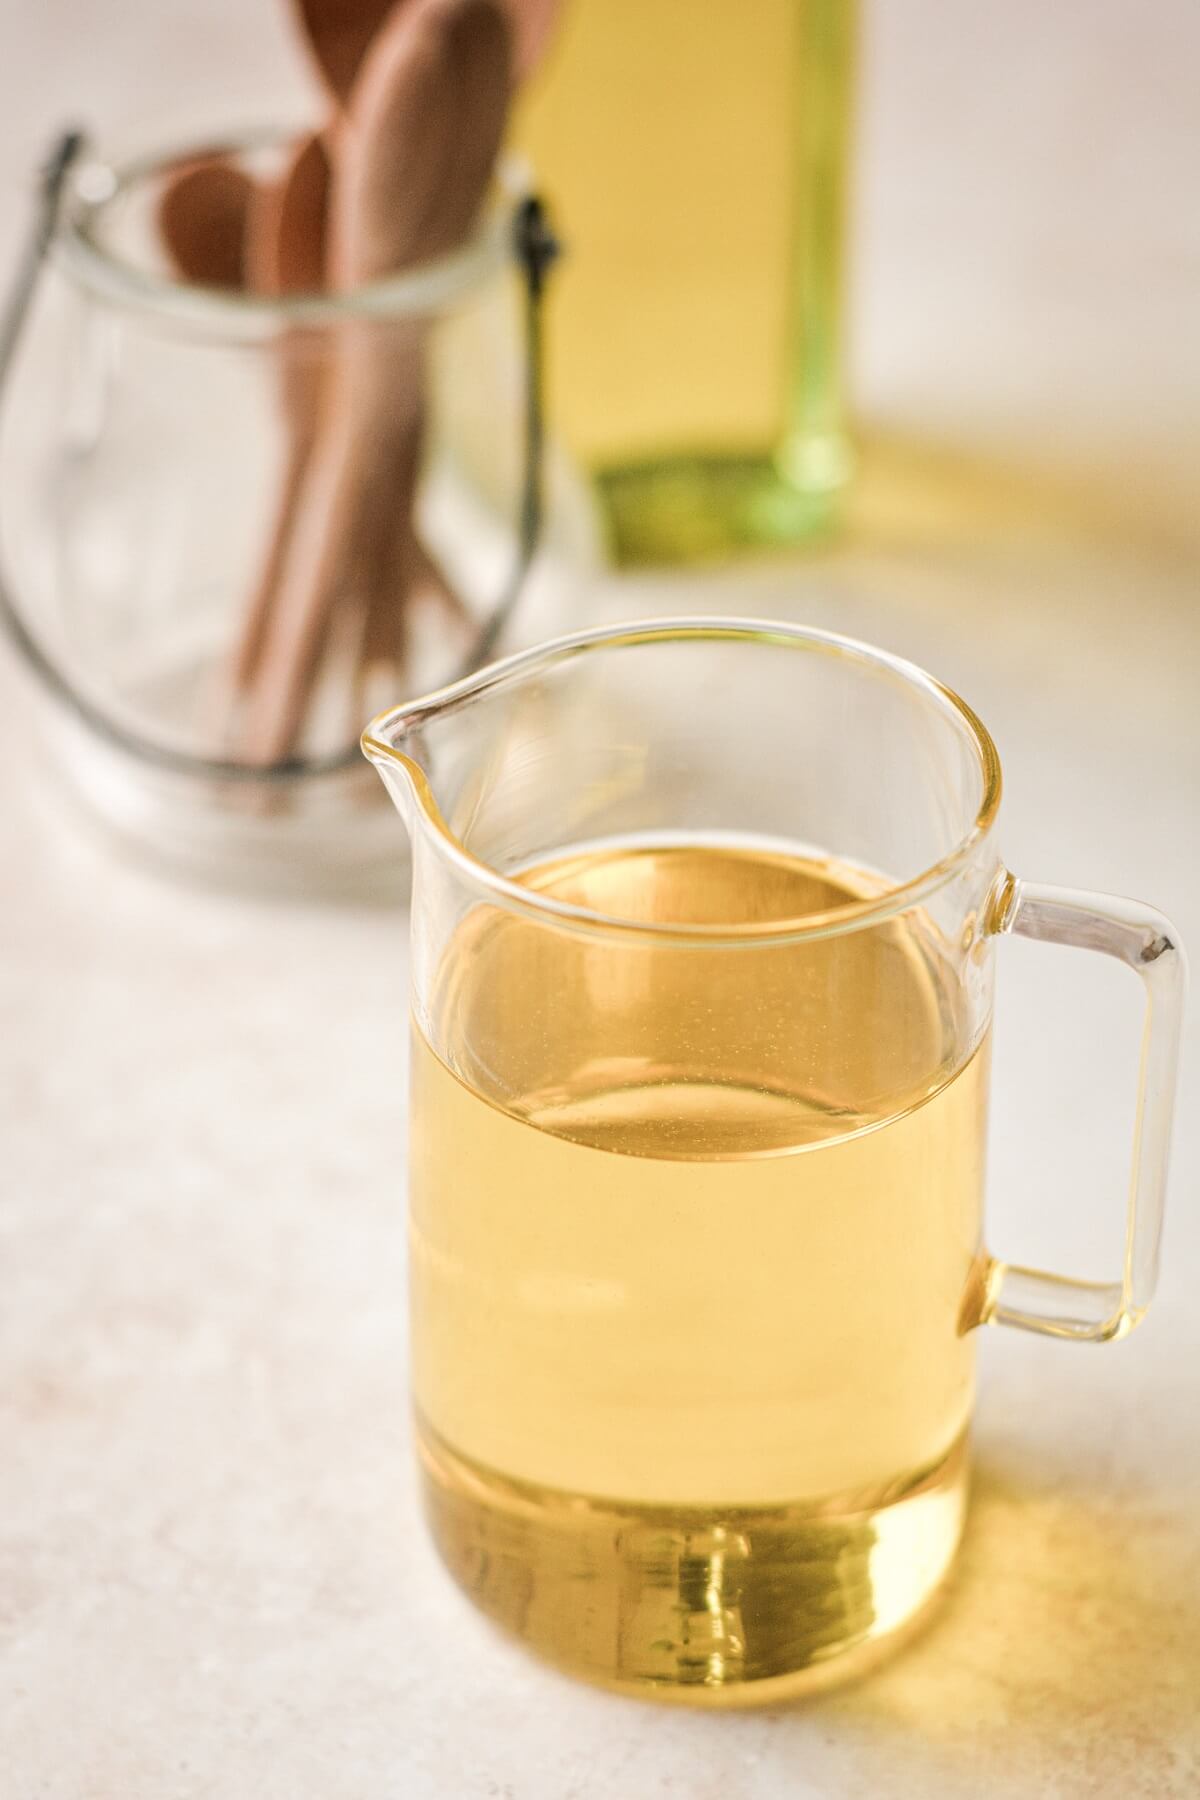 Glass pitcher of olive oil.